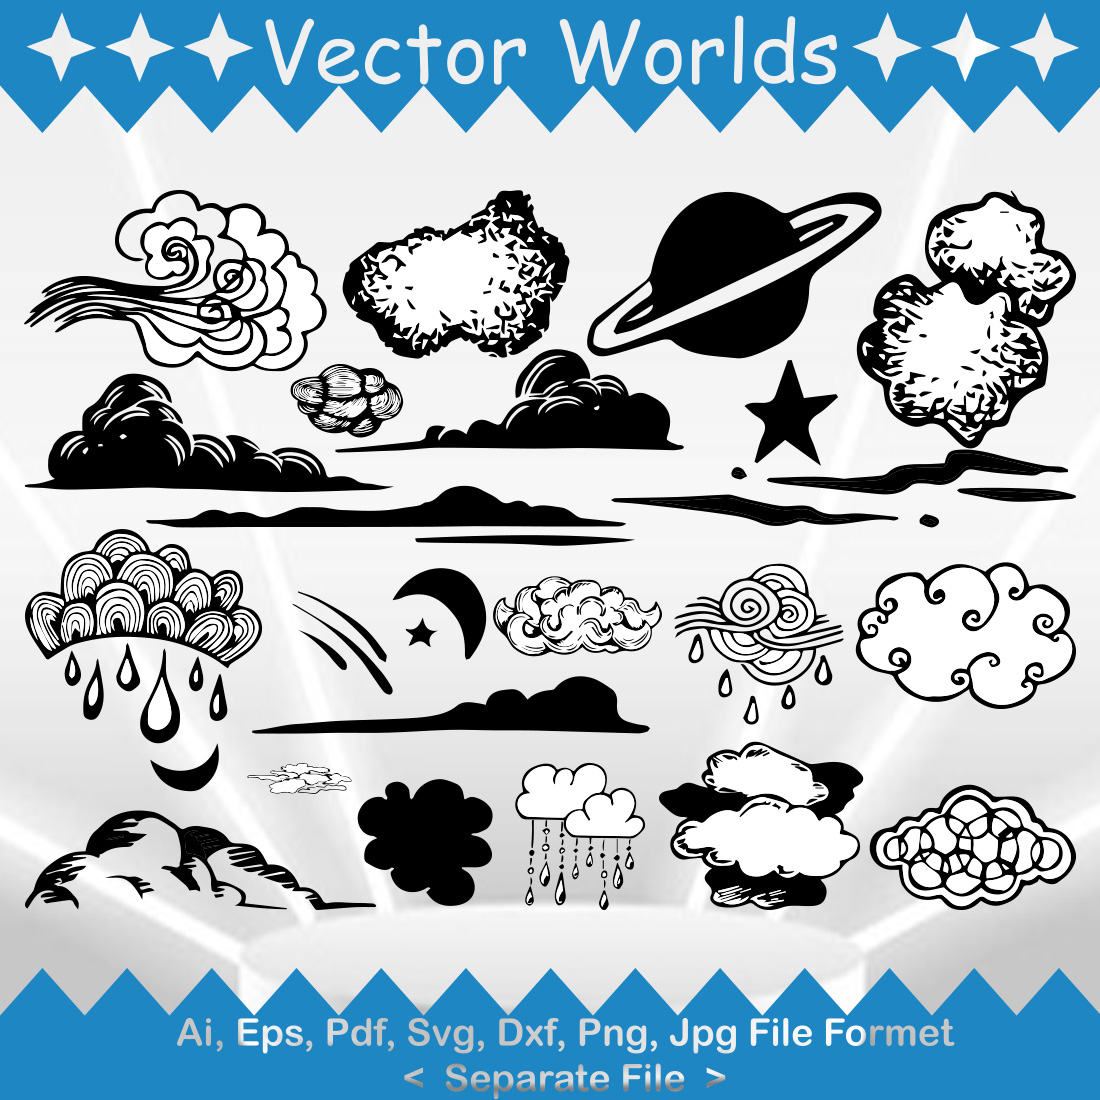 Clouds SVG Vector Design cover image.